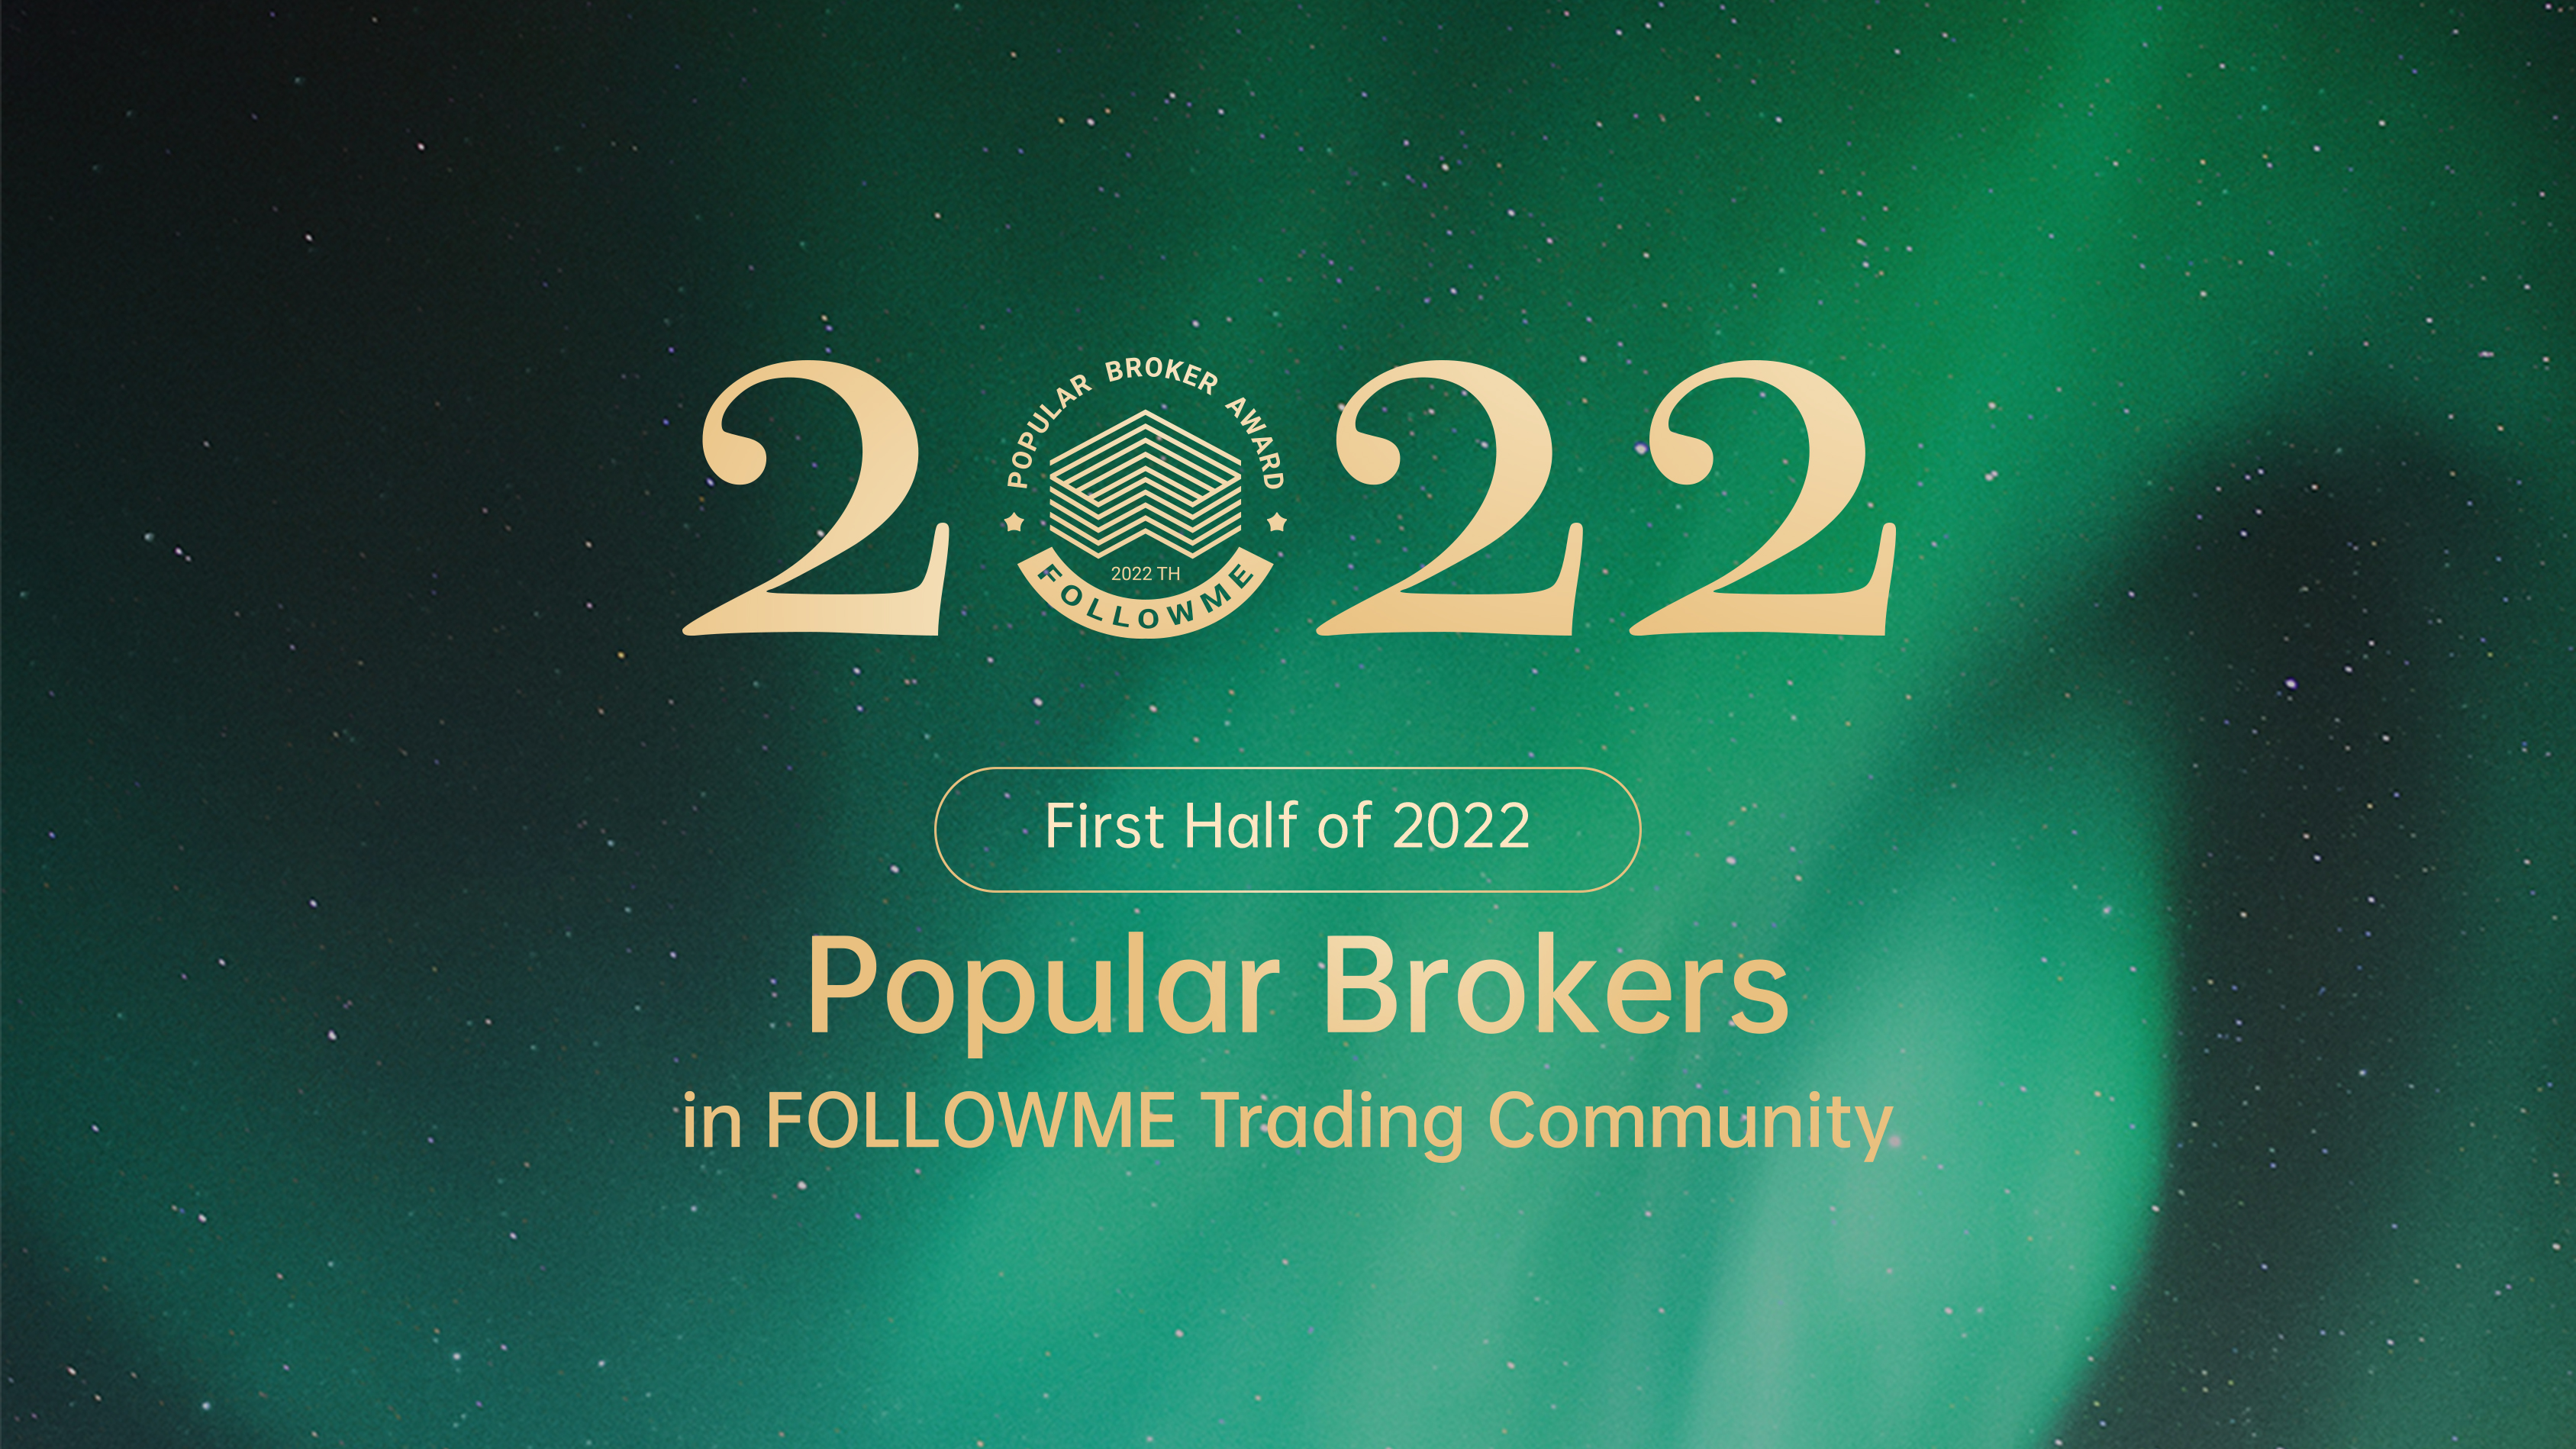 FOLLOWME Popular Brokers in the First Half of 2022 announced!